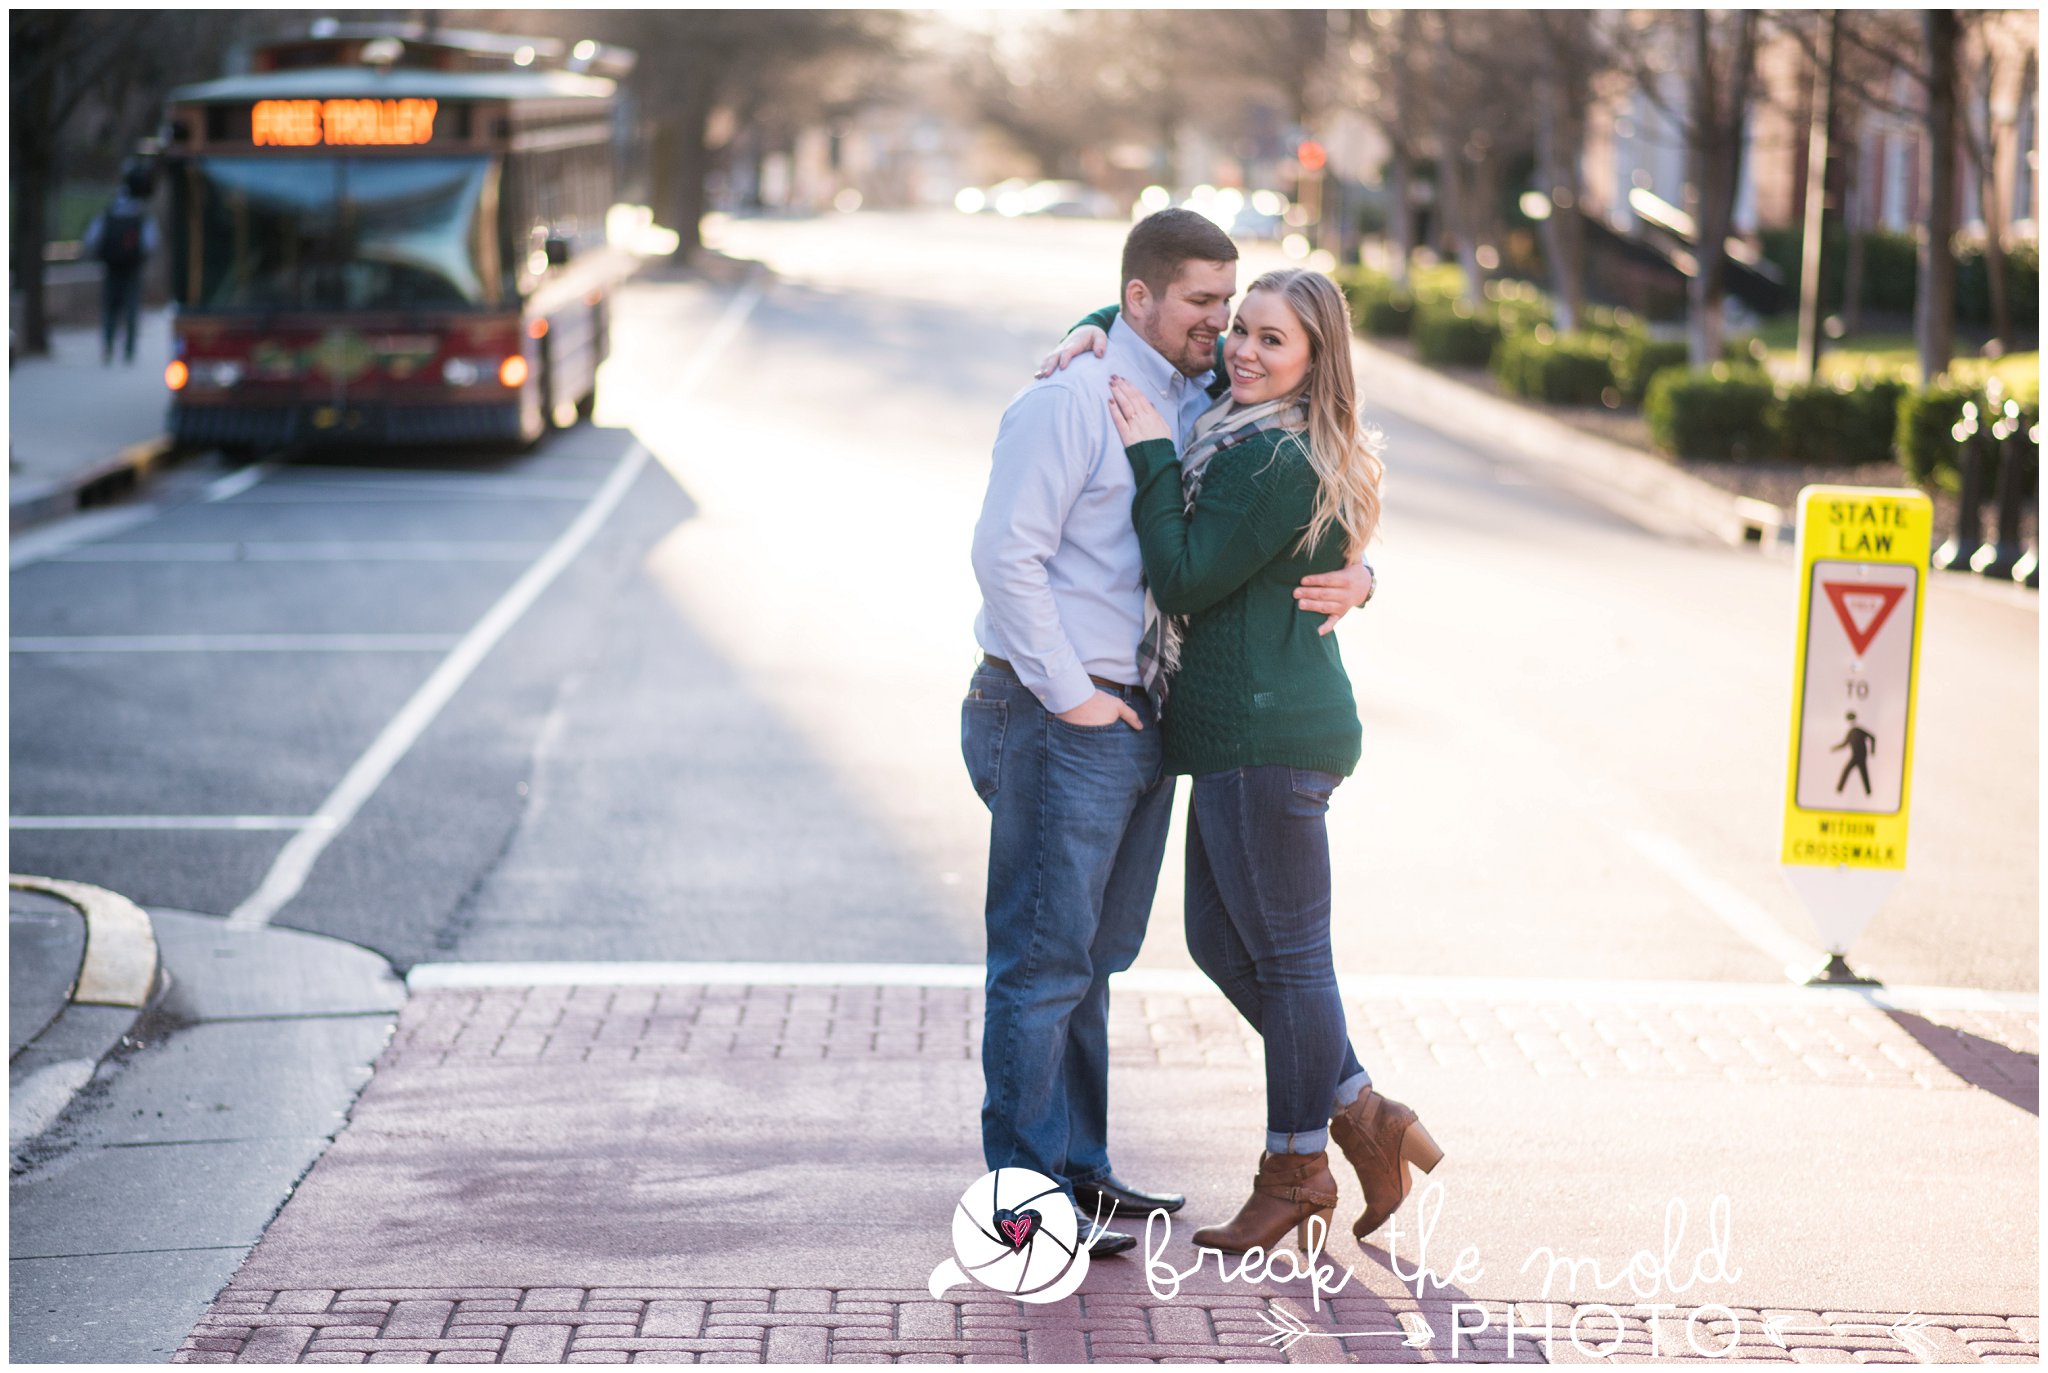 break-the-mold-photo-engagement-session-downtown-knoxville-try-before-you-buy_9874.jpg